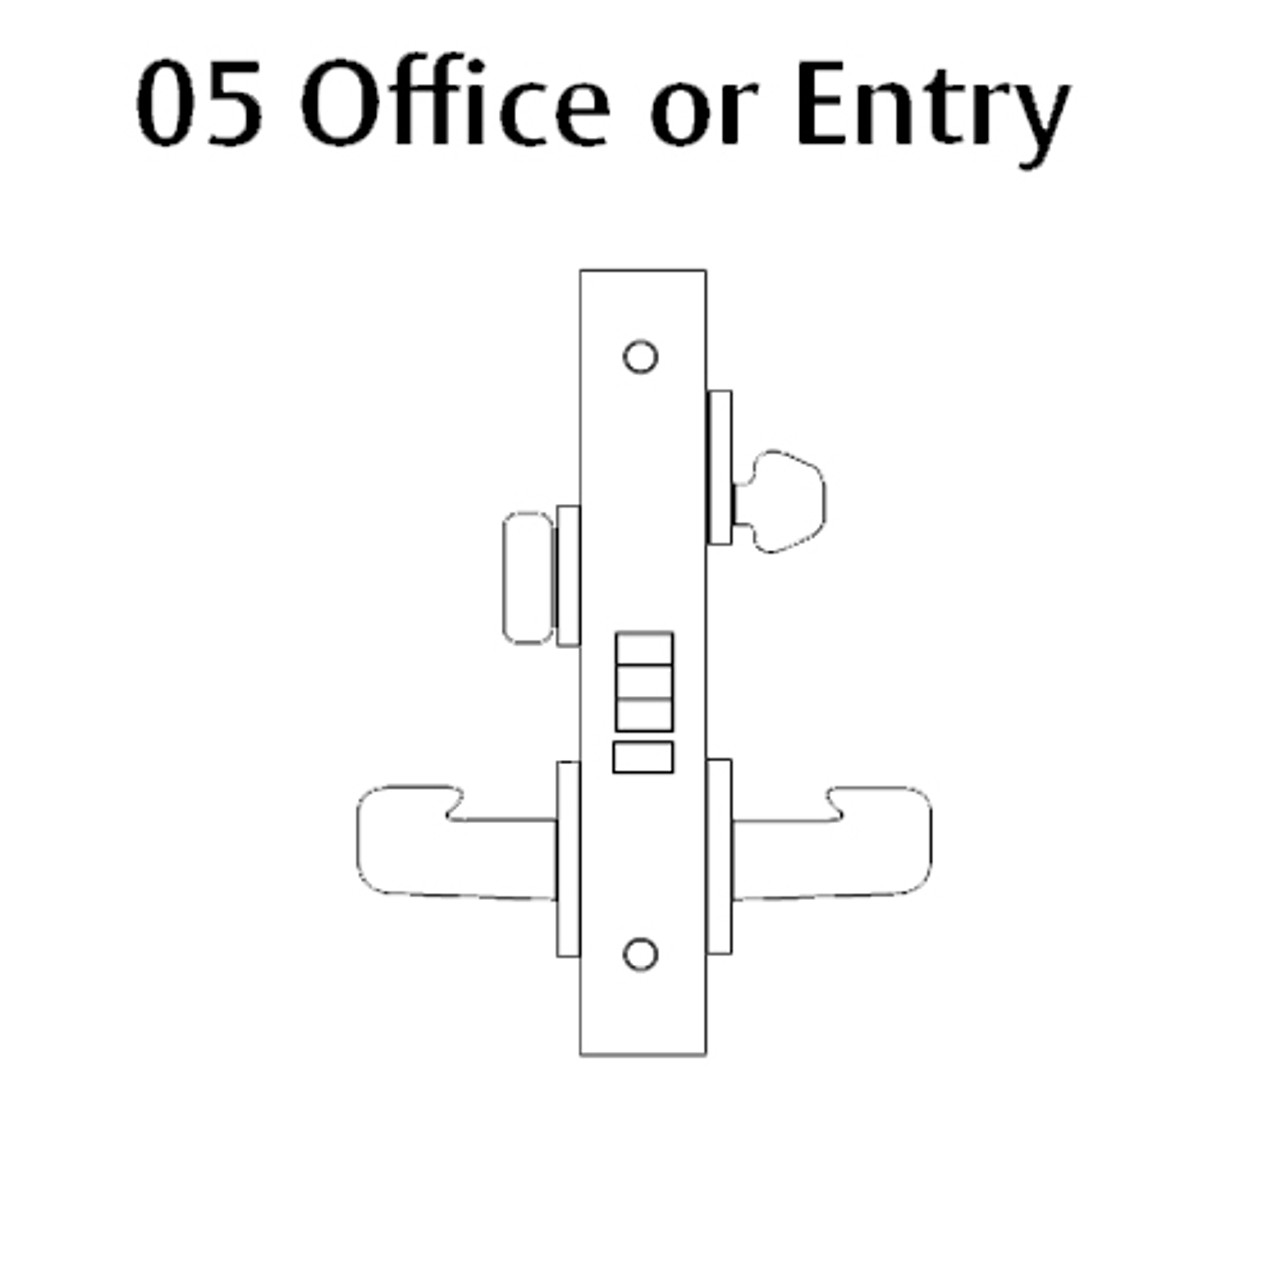 8205-LNW-26 Sargent 8200 Series Office or Entry Mortise Lock with LNW Lever Trim in Bright Chrome